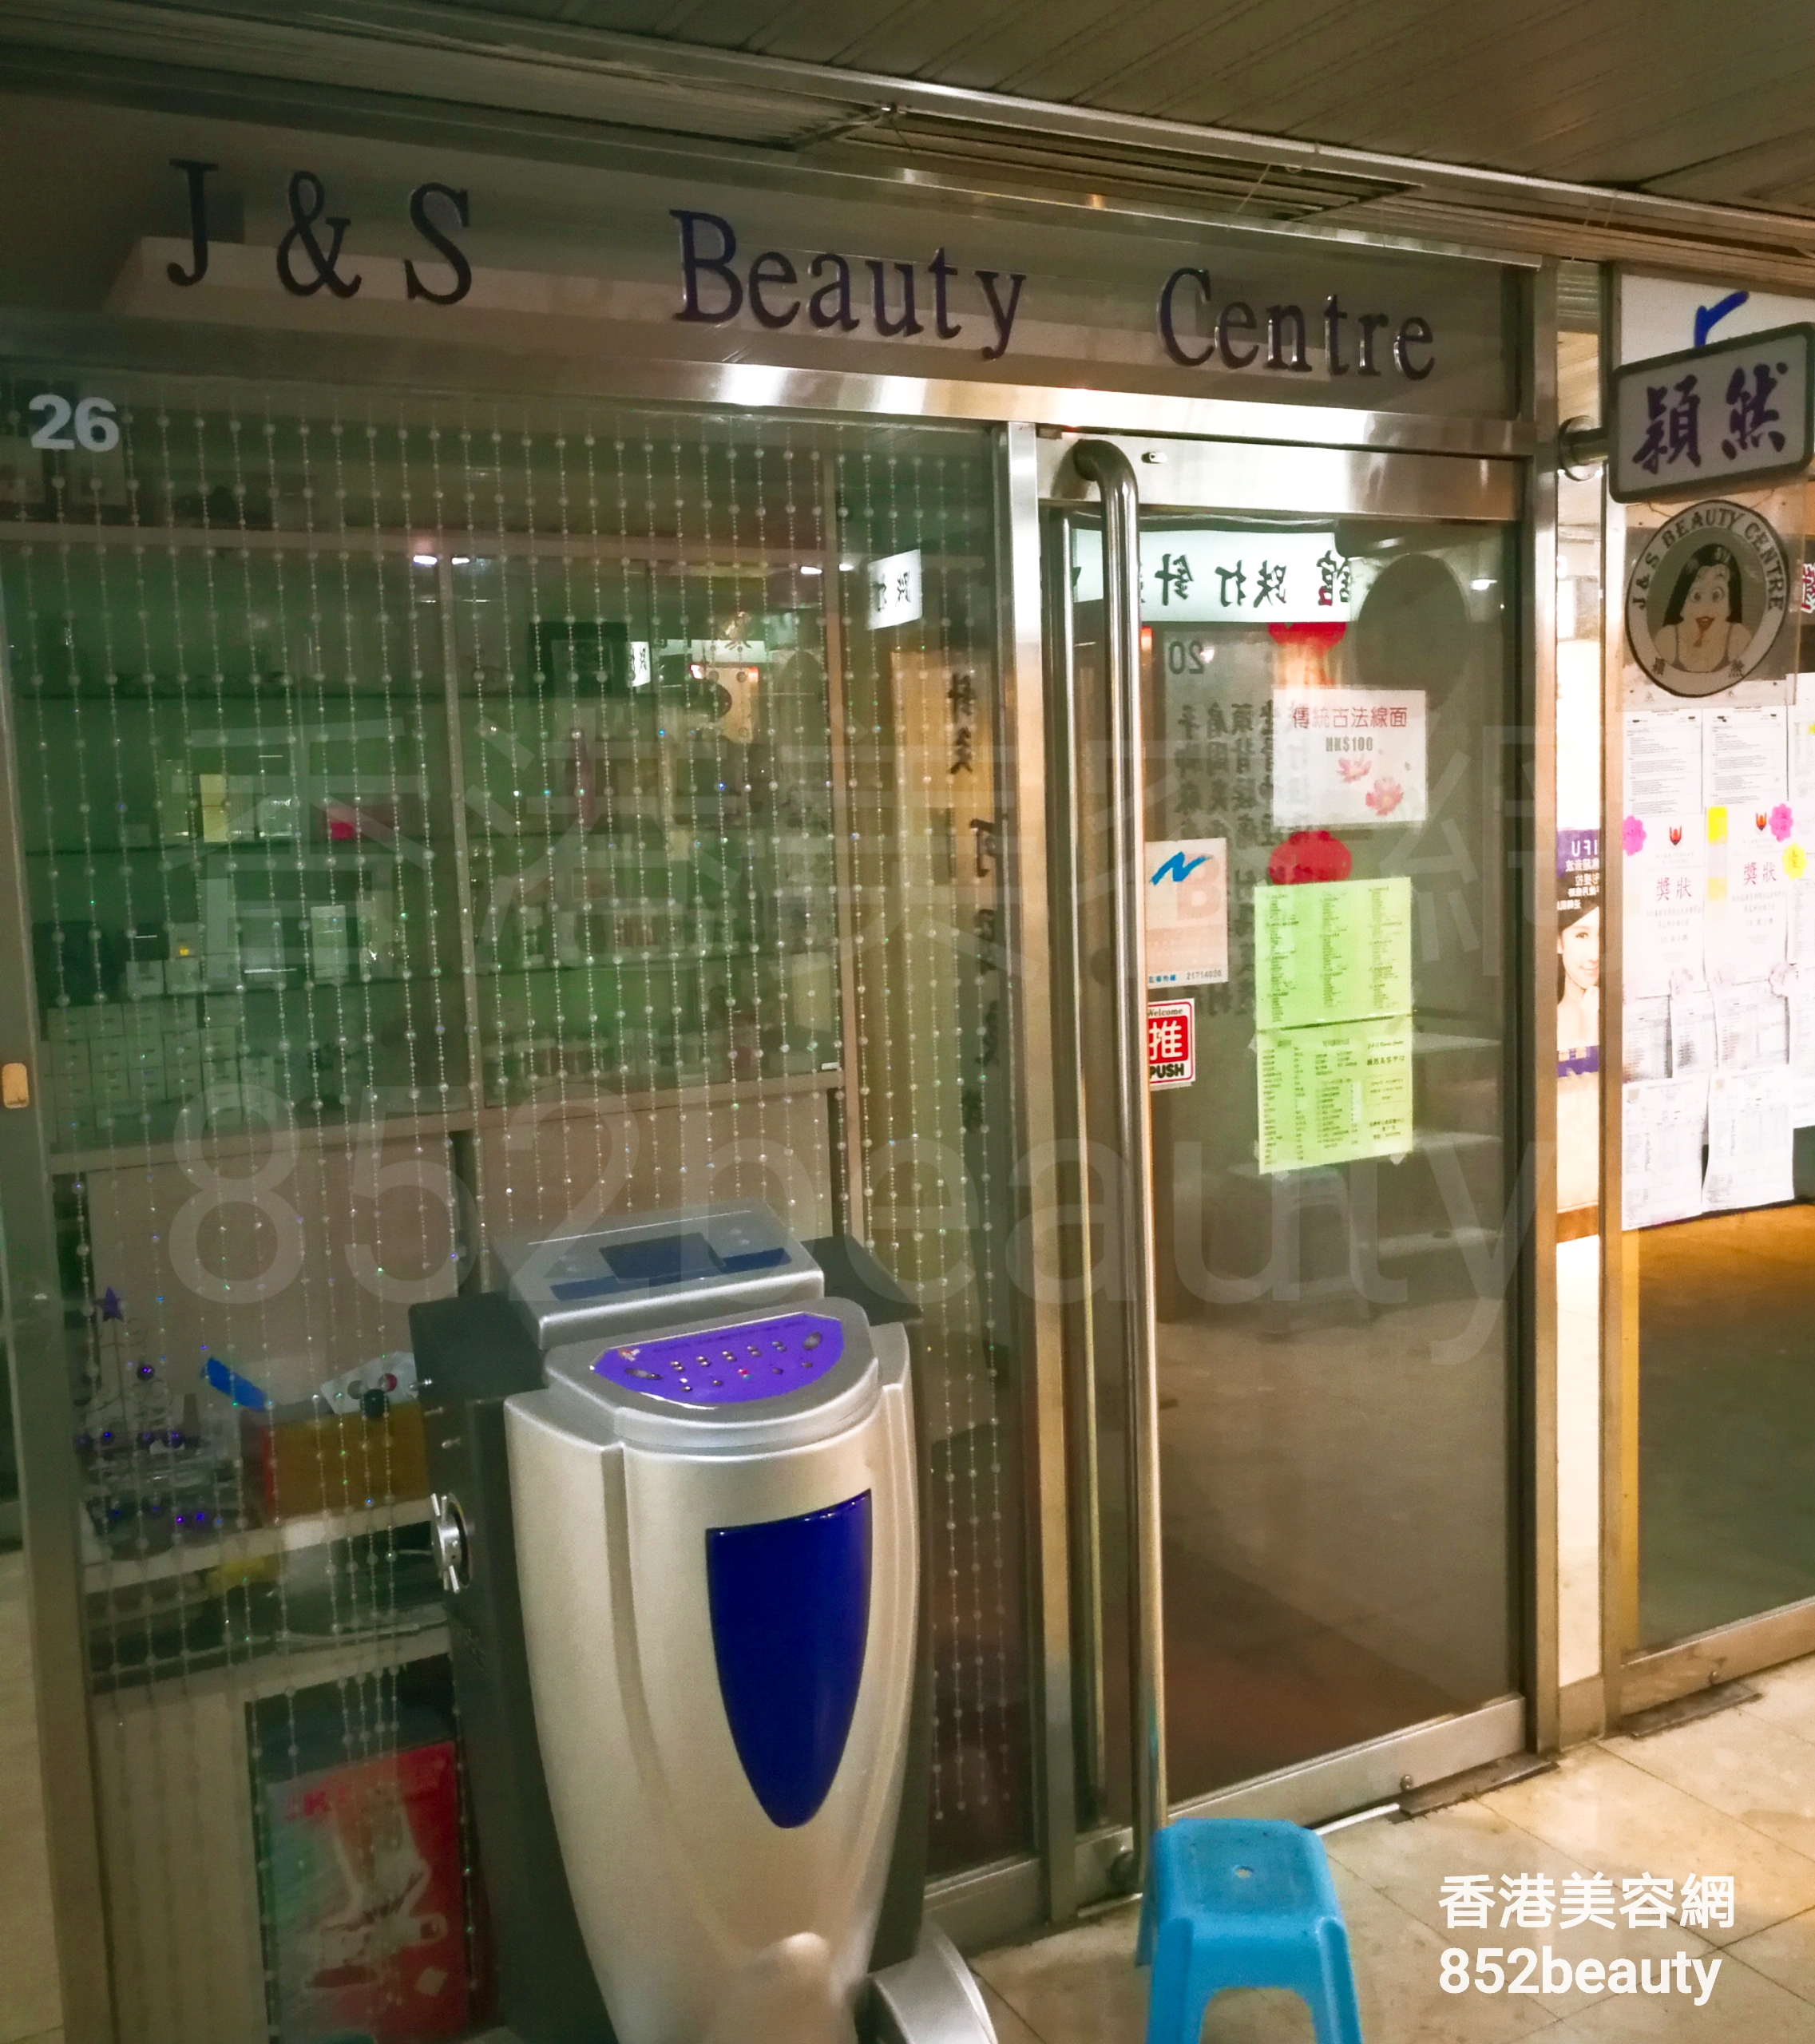 Hand and foot care: J&S Beauty Centre 穎然美容中心